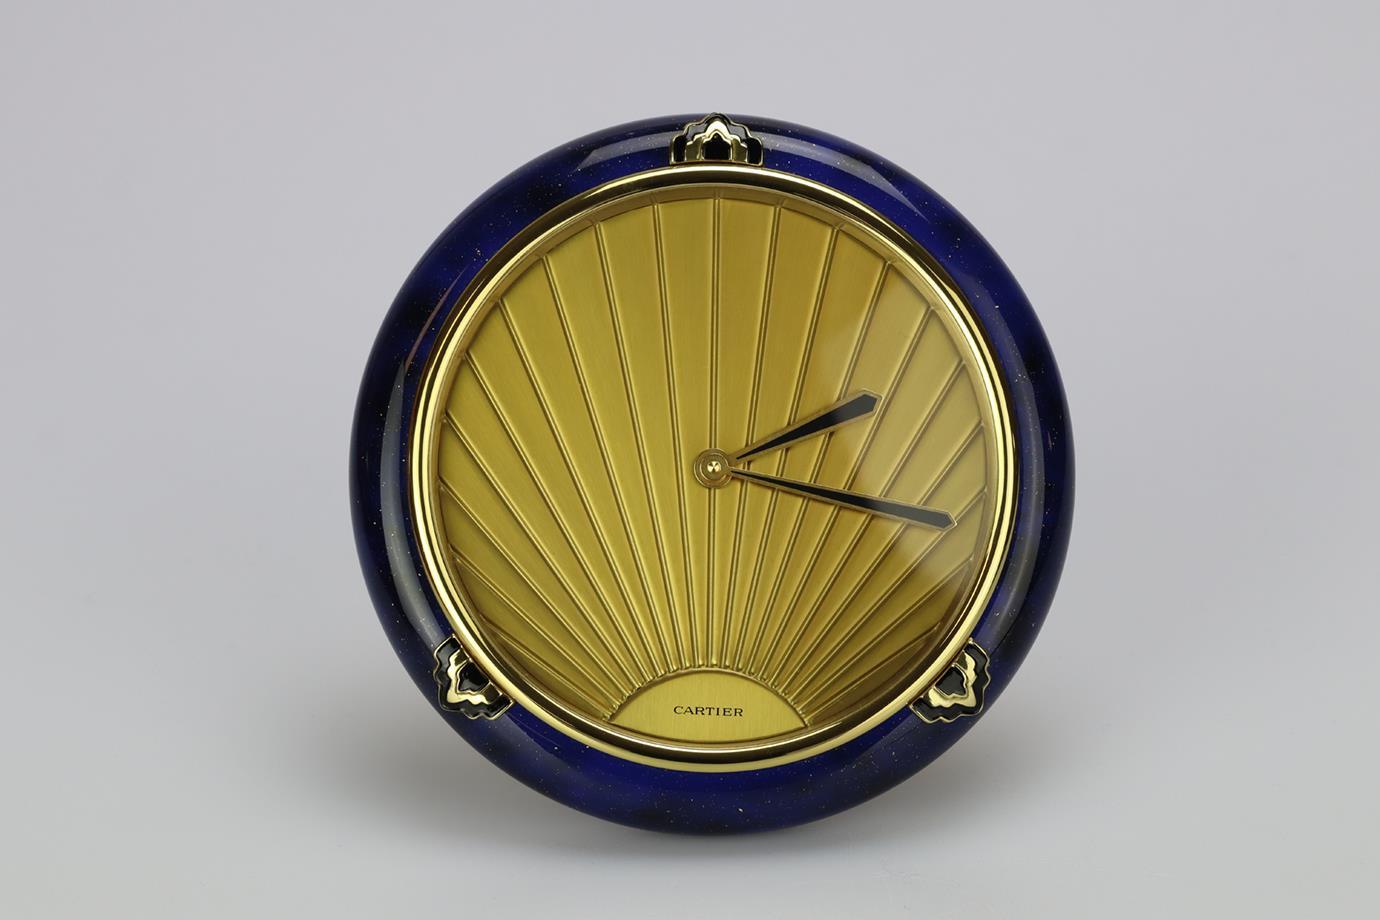 Cartier 1980 Must De Cartier Lapis Art Deco Desk Clock. Blue and gold. Comes with - case, box and valuation from Cartier for insurance. Quartz Movement. Brass case. Golden finish dial. Blue enamel. Diameter: 13 cm. New with tags.